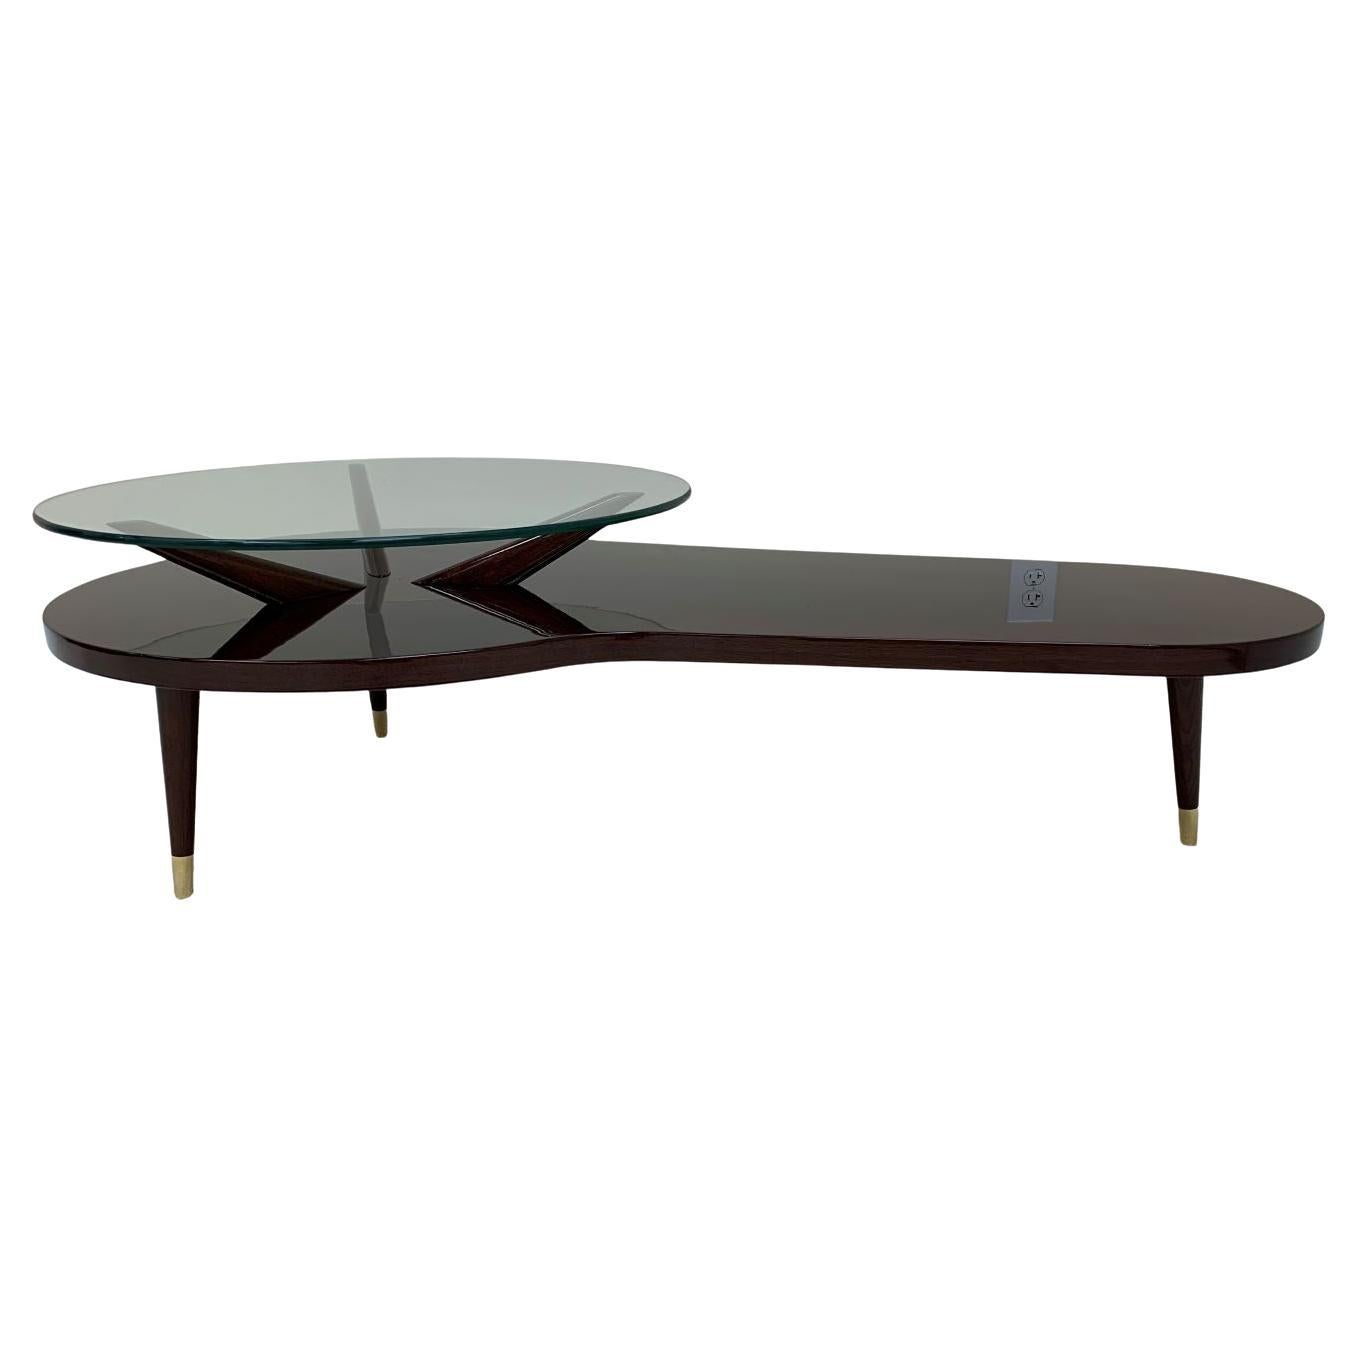 American Modern Biomorphic Mid Century cocktail table. Spectacular biomorphic design with a glass top circular end and an open radius end. Great attention to details noted with solid walnut legs adorned with polished brass caps. Dimensions 54.5